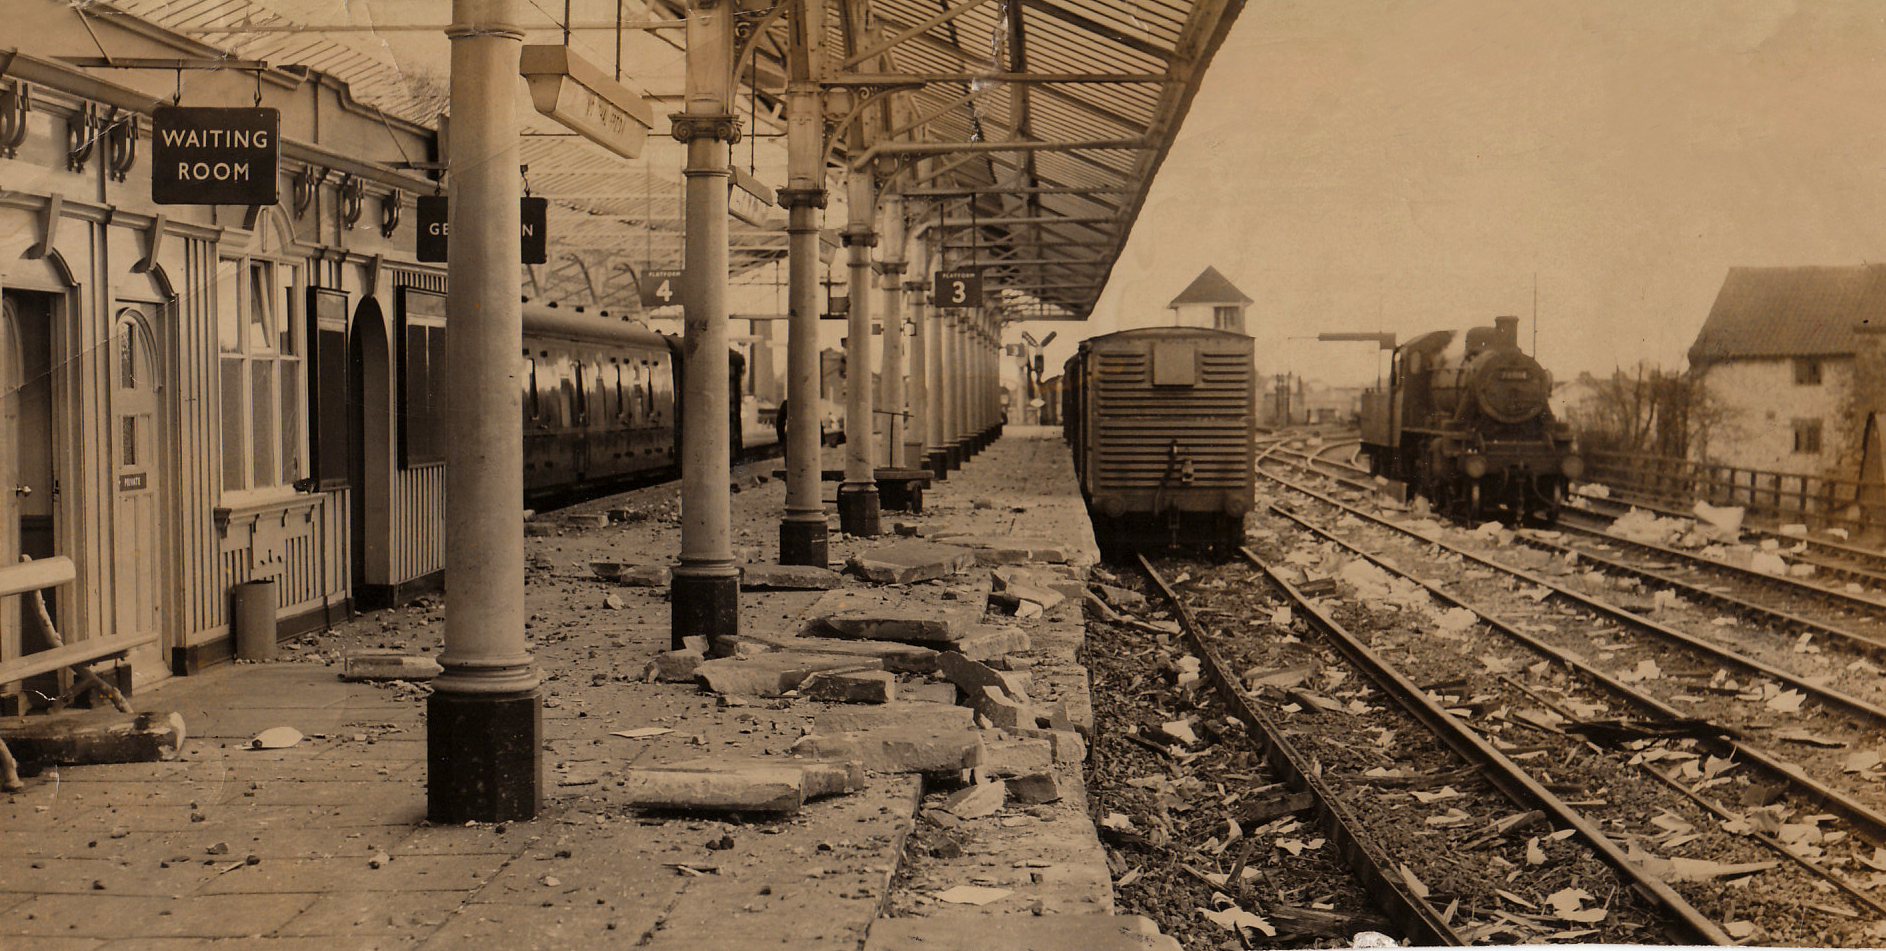 A parcels train derailment in Northallerton station in February 1961 caused the days newspapers to be shredded, creating a snowstorm of news which covered the platforms